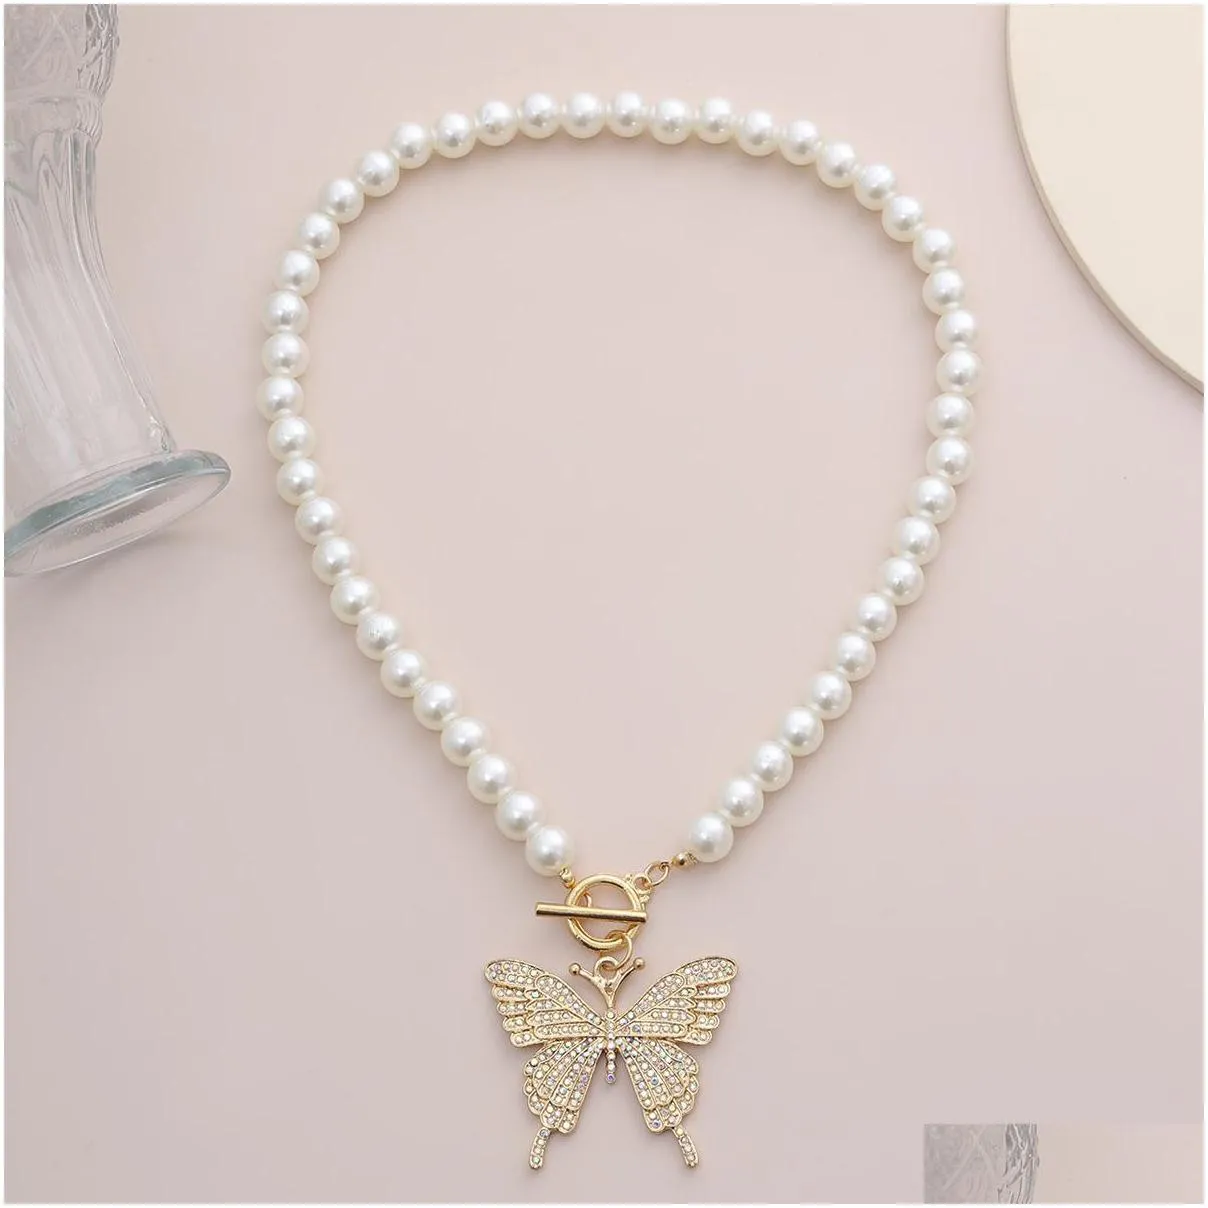 butterfly imitation pearl necklaces iced out pendant luxury gold women bling rhinestone animal jewelry fashion party choker necklace